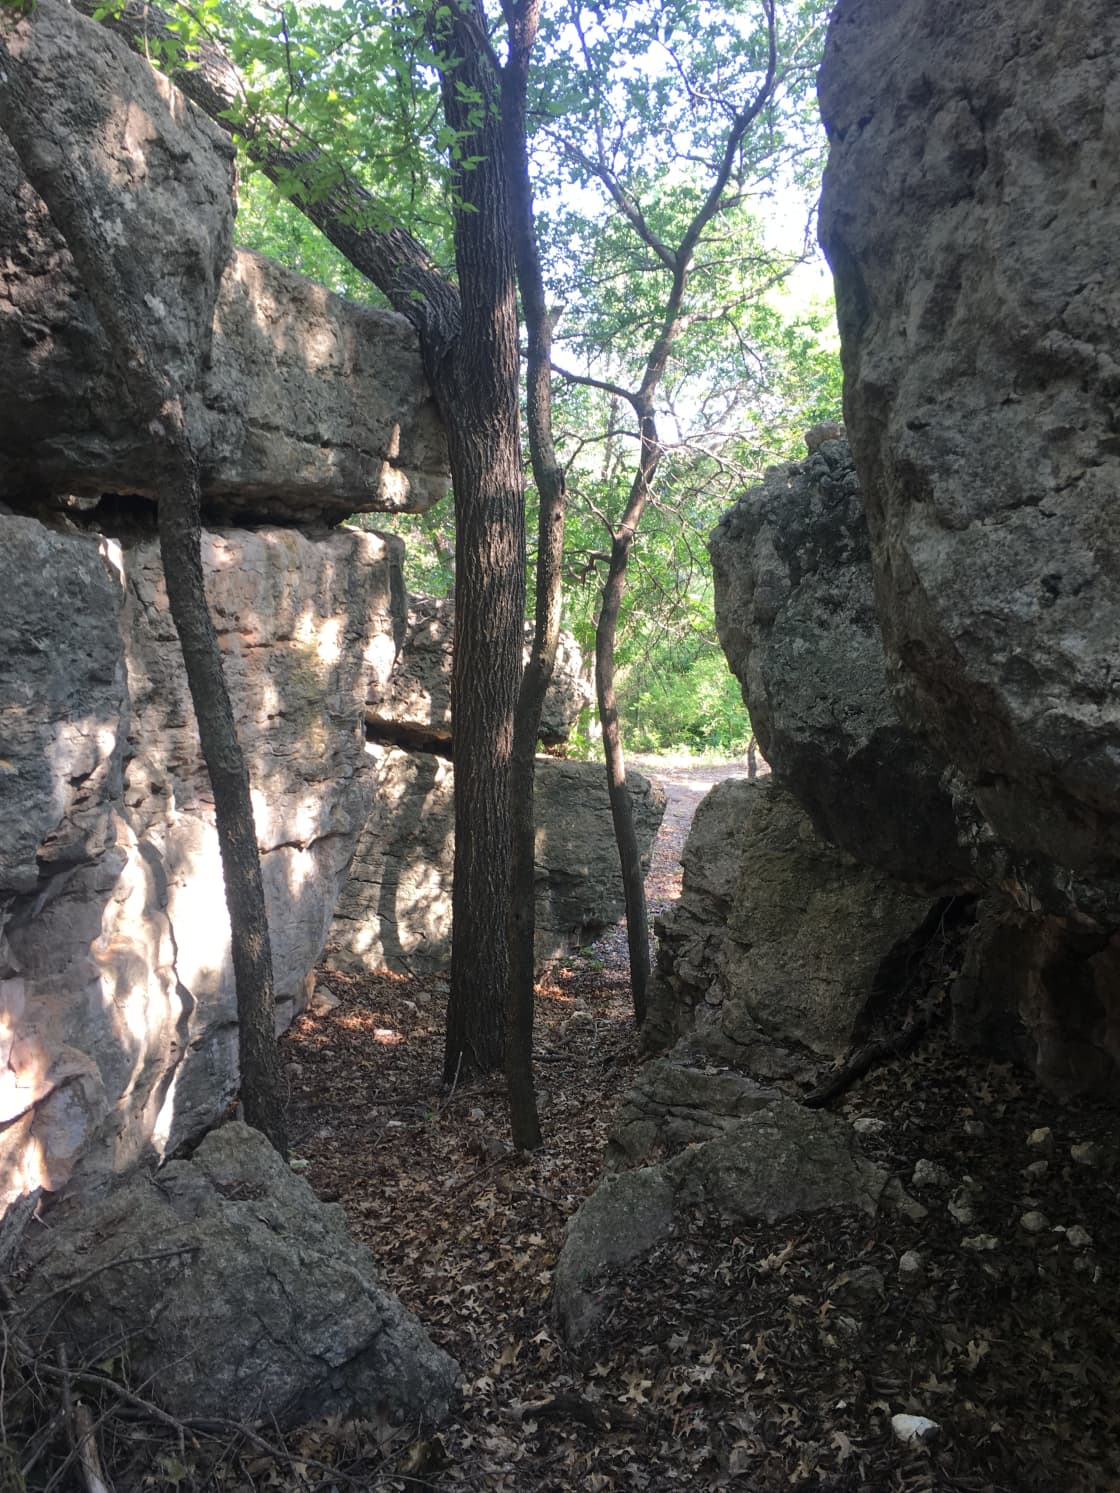 Another interesting rock formation.  Hikers can spend hours exploring every nook and cranny!